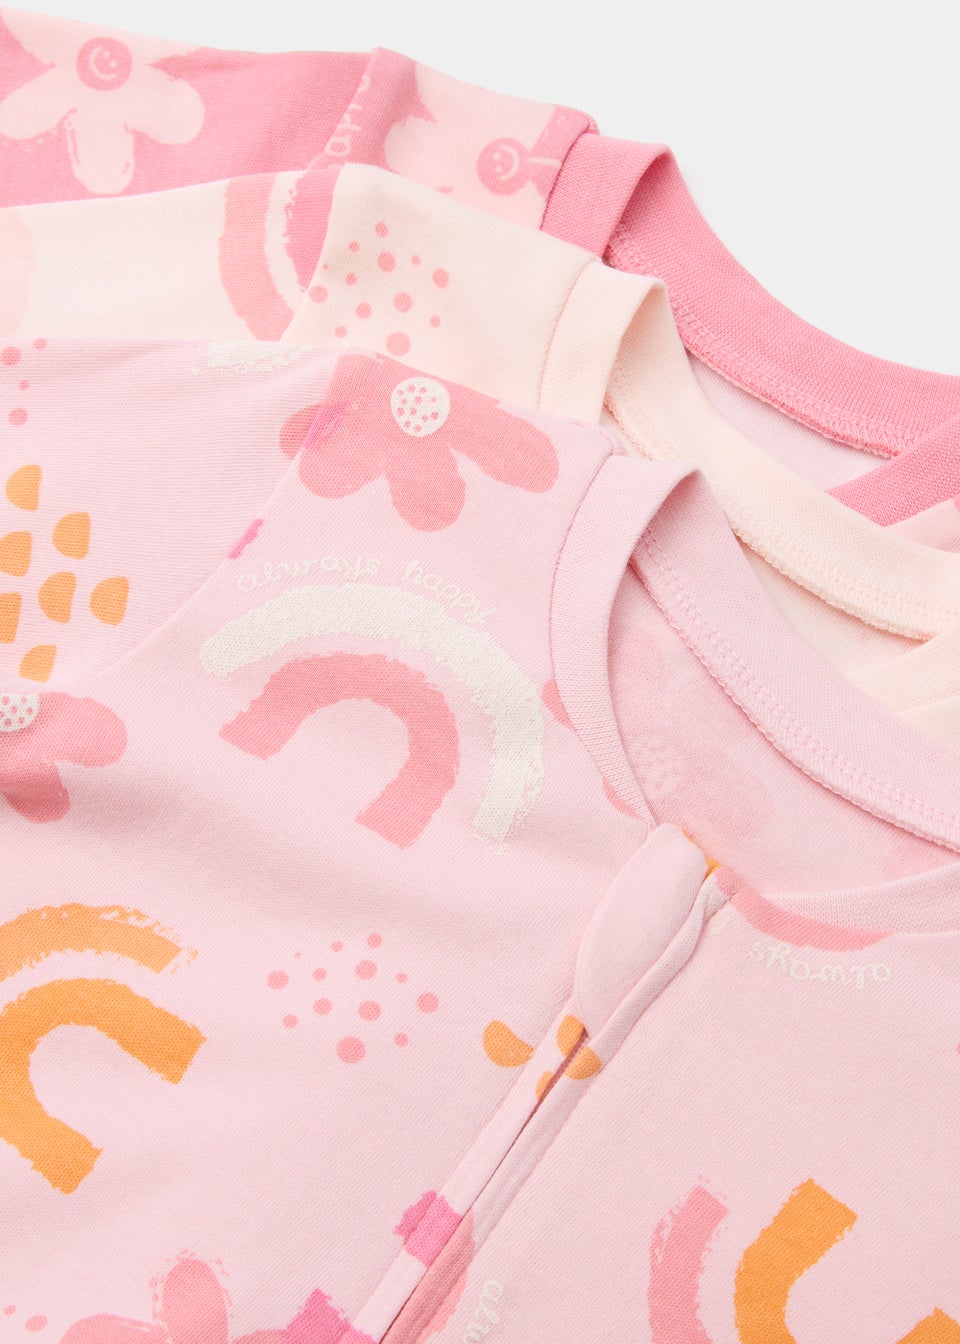 Baby 3 Pack Pink Flower Zip Up Sleepsuits (Tiny Baby-18mths)